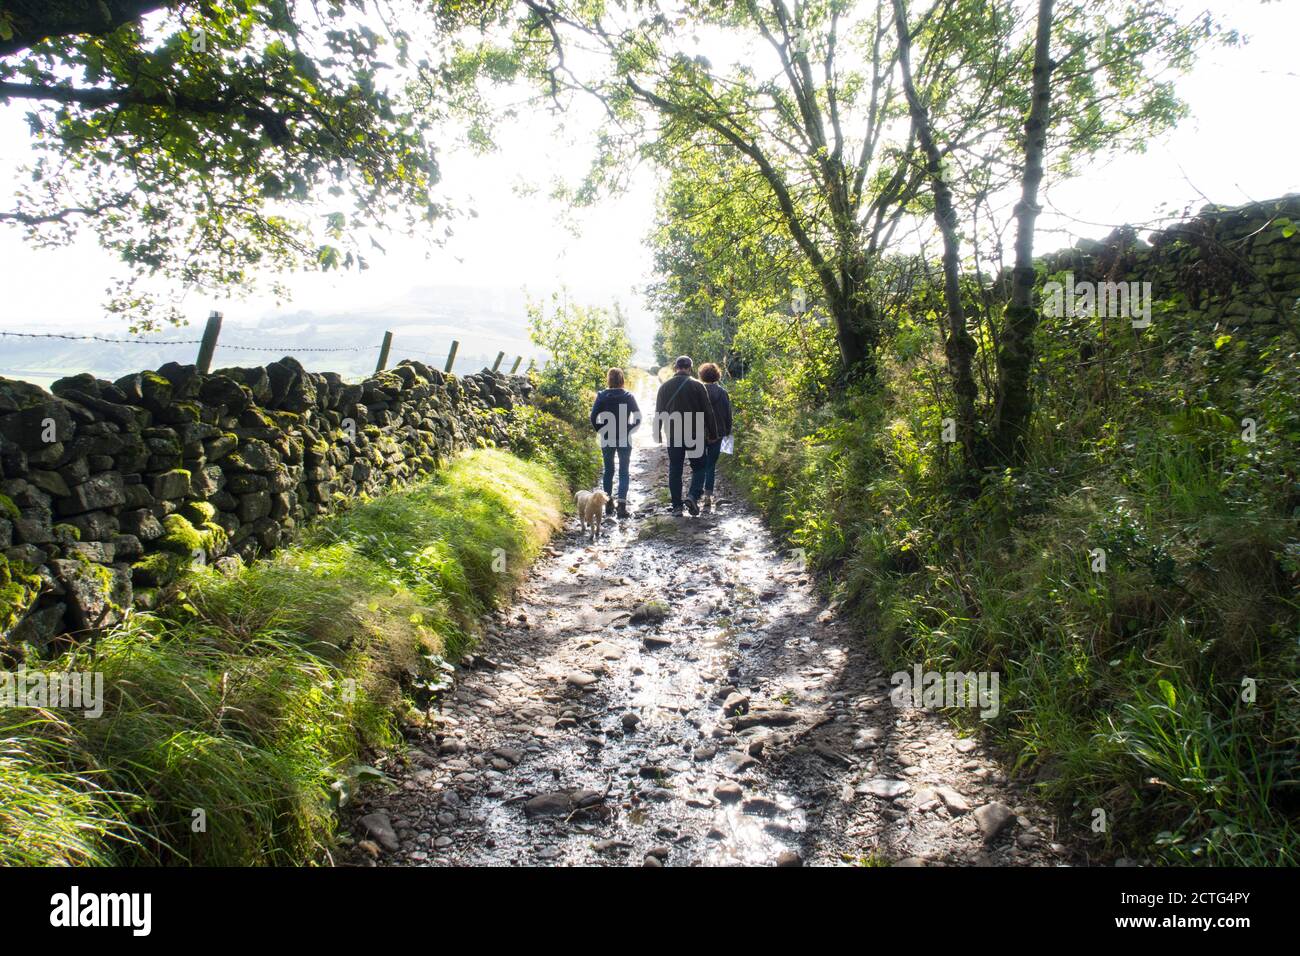 Three people walking down a rocky farm track lined with a drystone wall and trees in the Peak District with a dog on a summers day Stock Photo